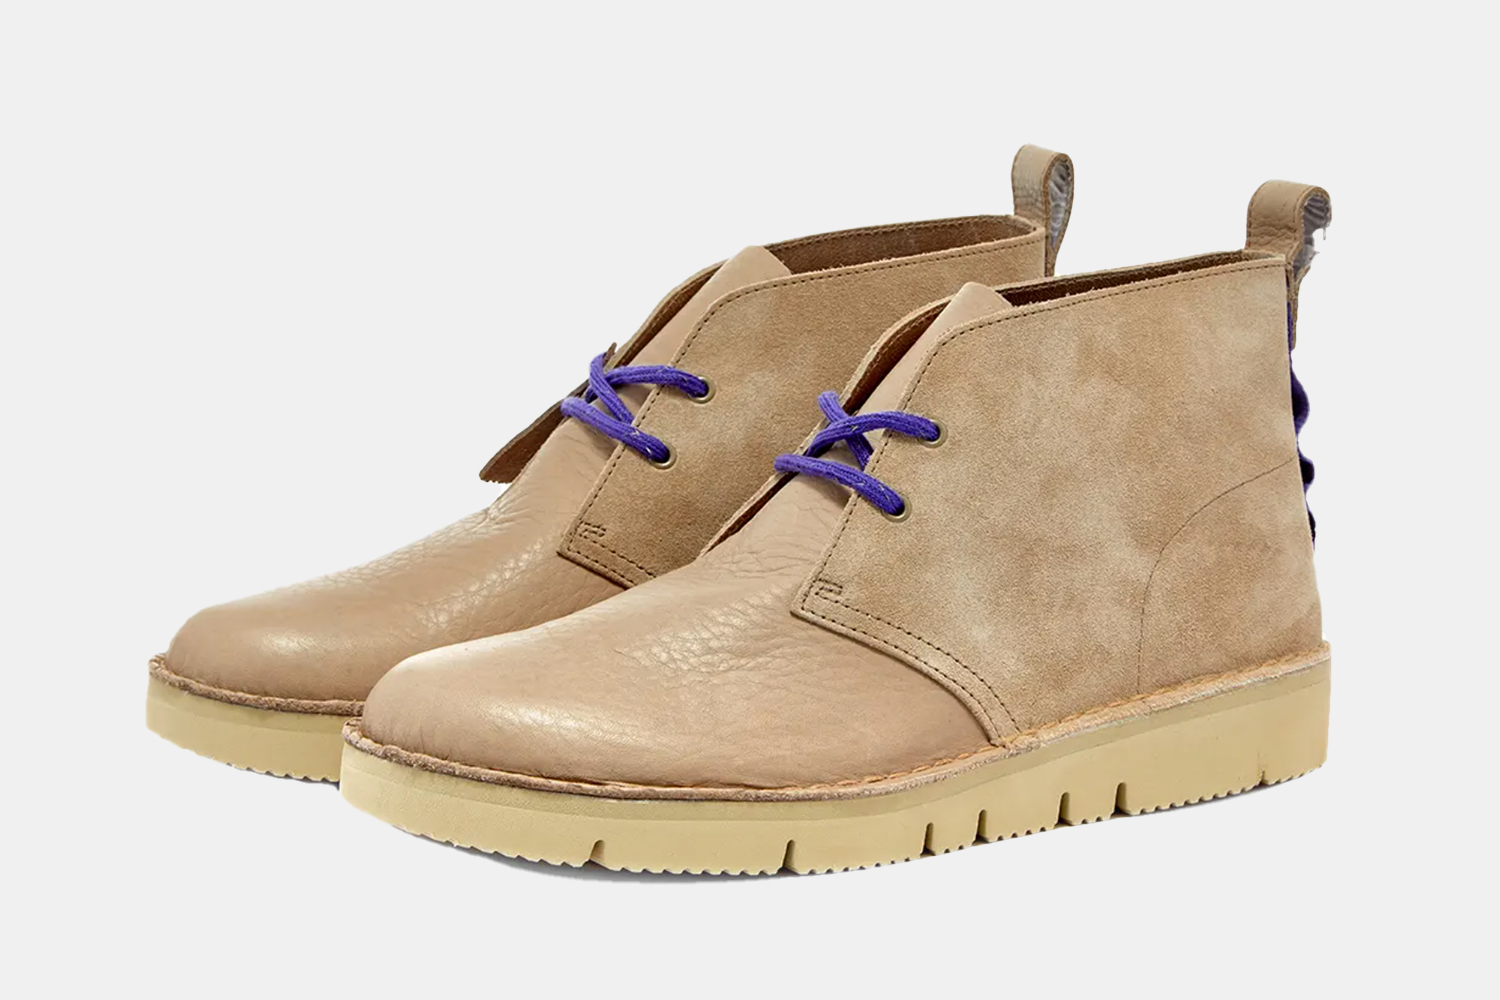 A Bunch Clarks' Stylish Boots are on Sale at End Clothing - InsideHook